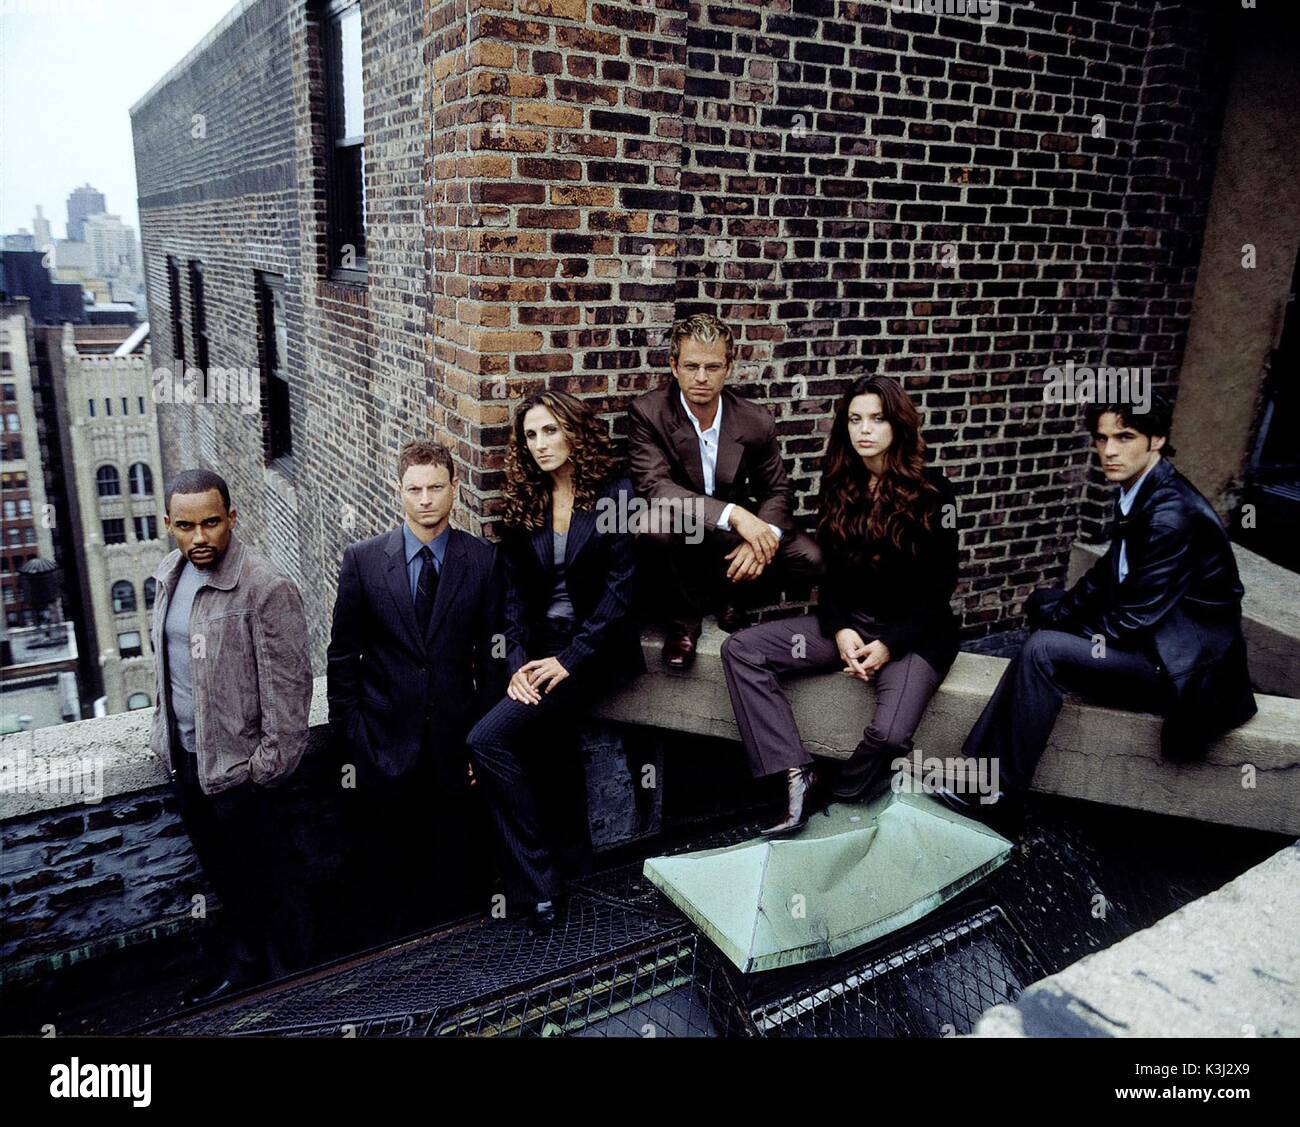 (L-R) HILL HARPER, GARY SINISE, MELINA KANAKAREDES, CAEMINE GIOVINAZZO, VENESSA FERLITO and EDDIE CAHILL. Licensed by CHANNEL 5 BROADCASTING. Five Stills: 0207 550 5509. Free for editorial press and listings use in connection with the current broadcast of Channel 5 programmes only. This Image may only be reproduced with the prior written consent of Channel 5. Not for any form of advertising, internet use or in connection with the sale of any product. CSI: NY aka CSI: NEW YORK HILL HARPER as Dr. Sheldon Hawkes, GARY SINESE as Det. Mac Taylor, MELINA KANAKAREDES as Det. Stella Bonasera, CARMINE Stock Photo